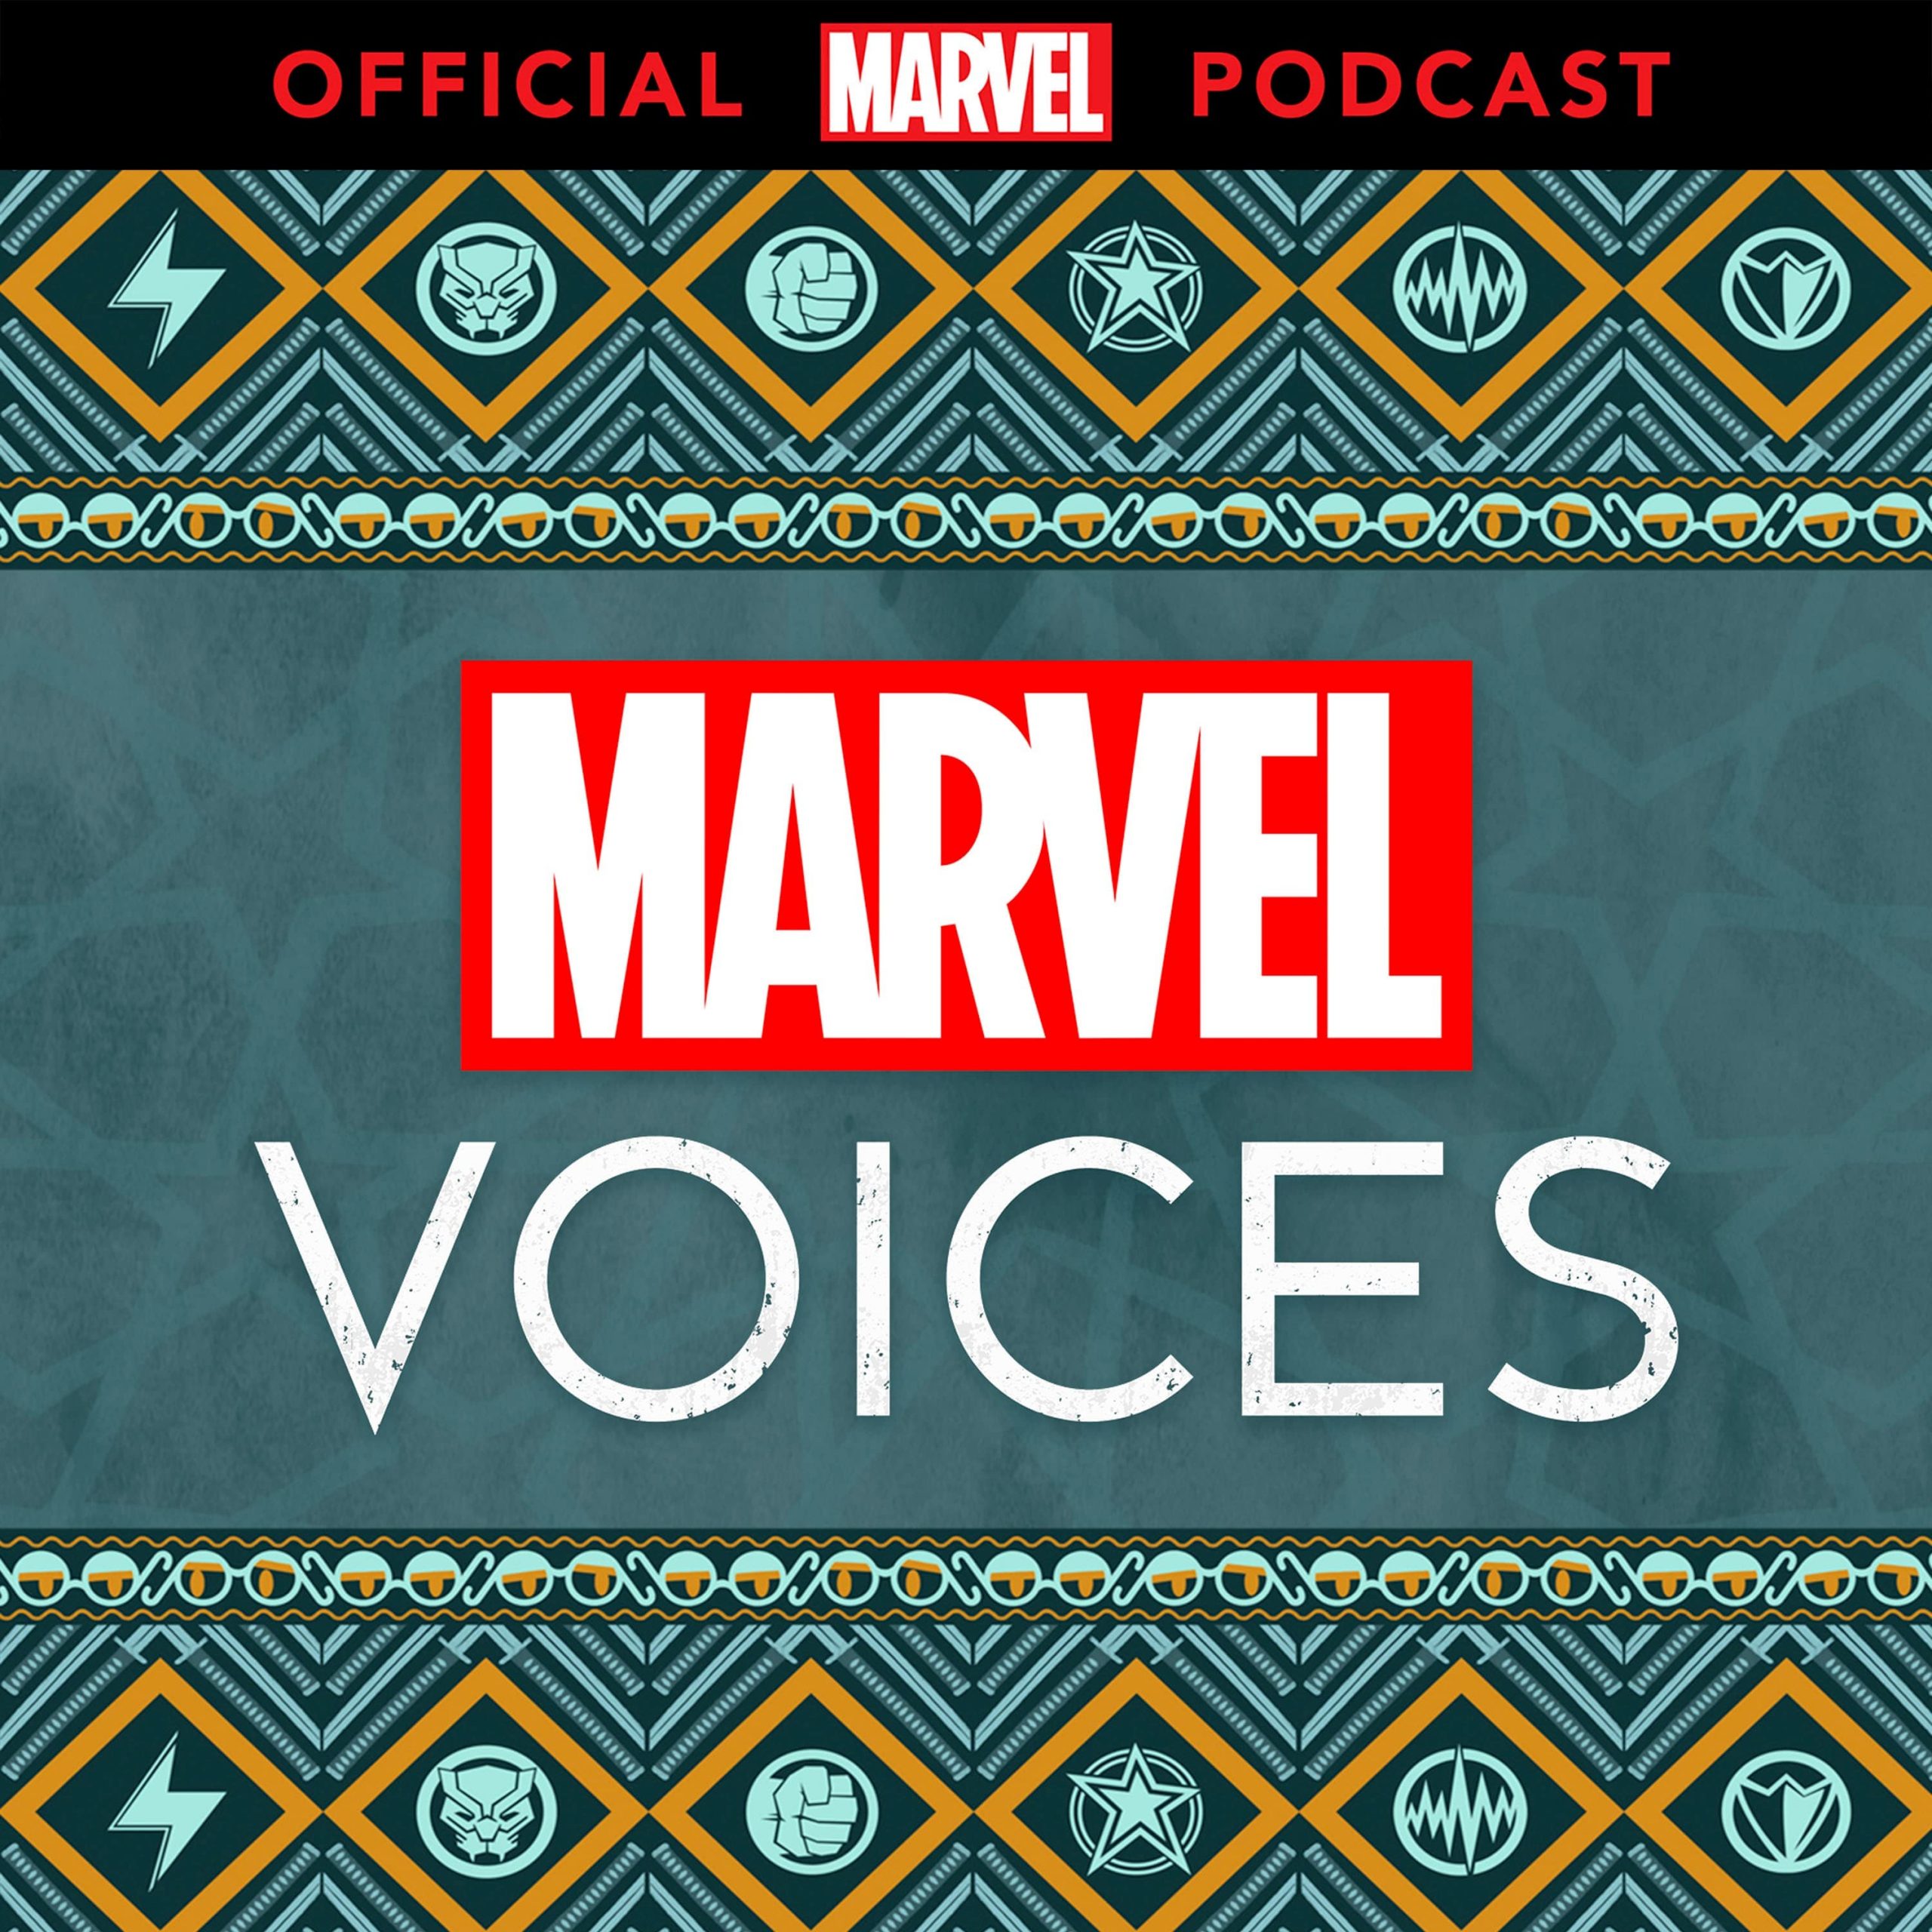 'Marvel's Voices' podcast returns for new 8-episode season tomorrow